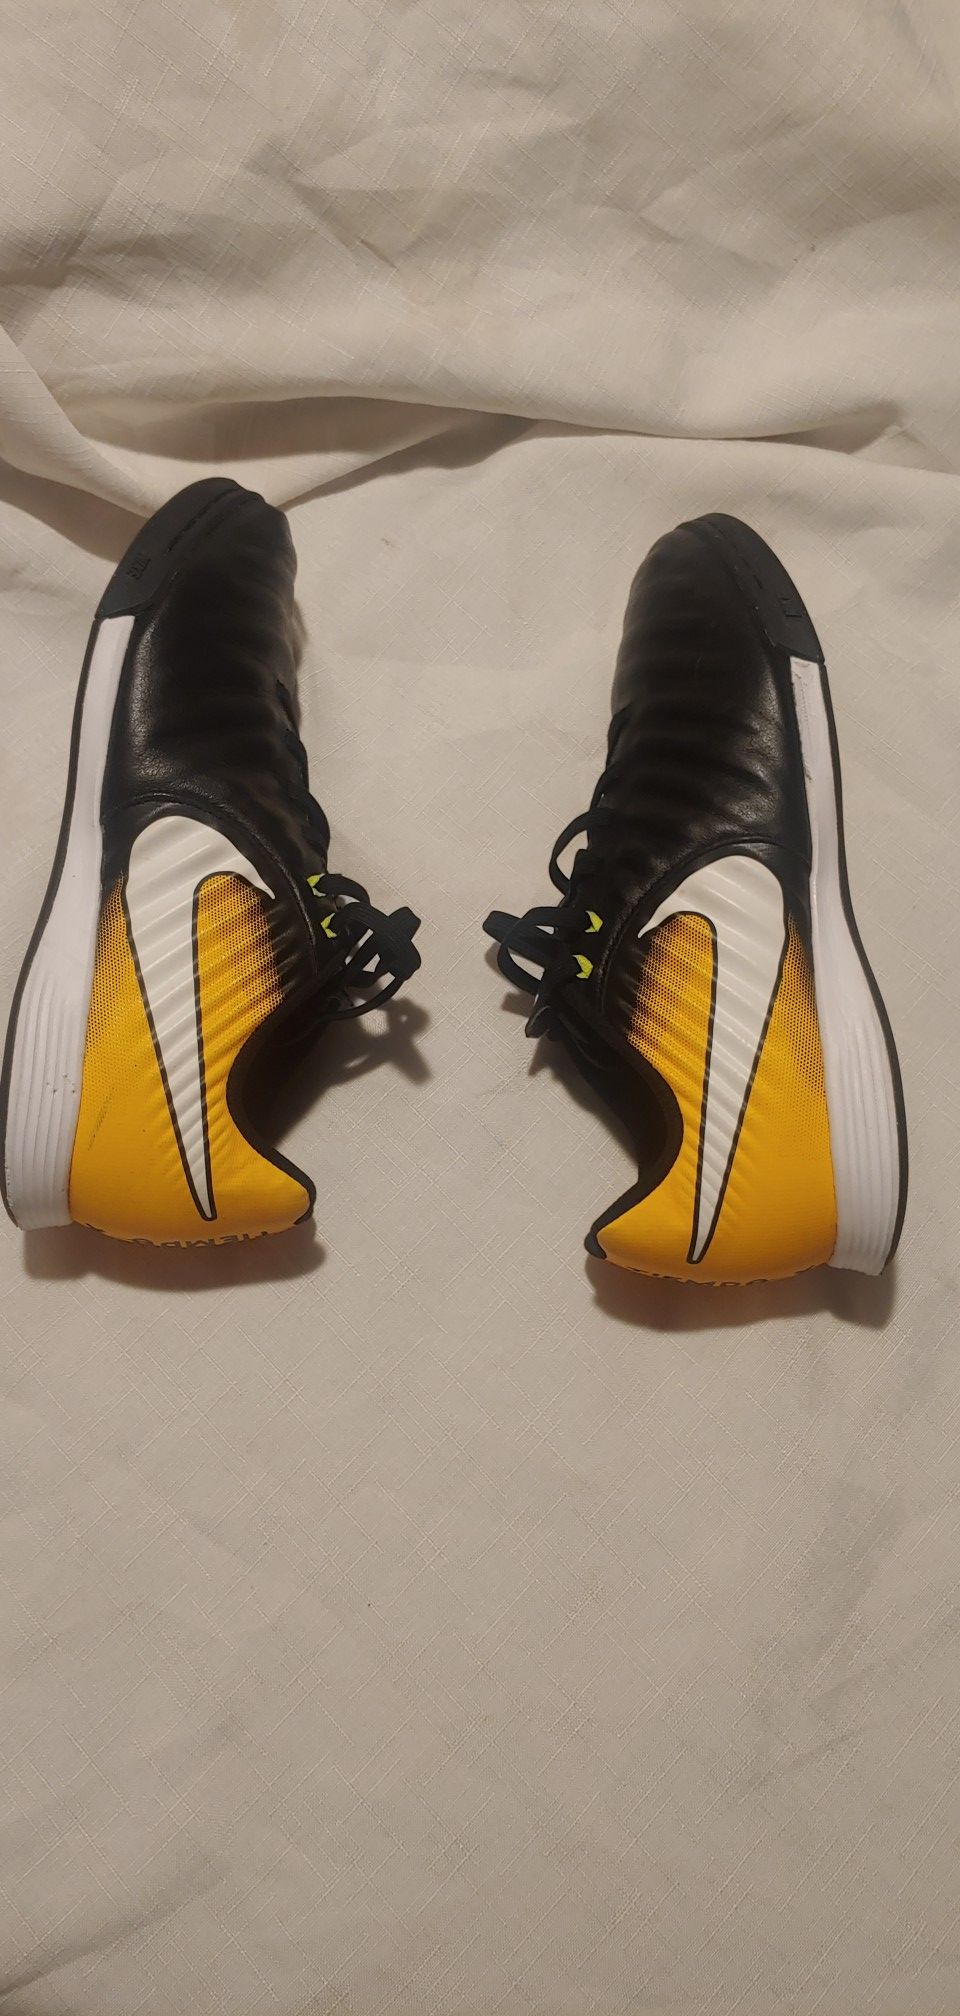 Boys tiempo x black and yellow nike Soccer cleats size 5.5